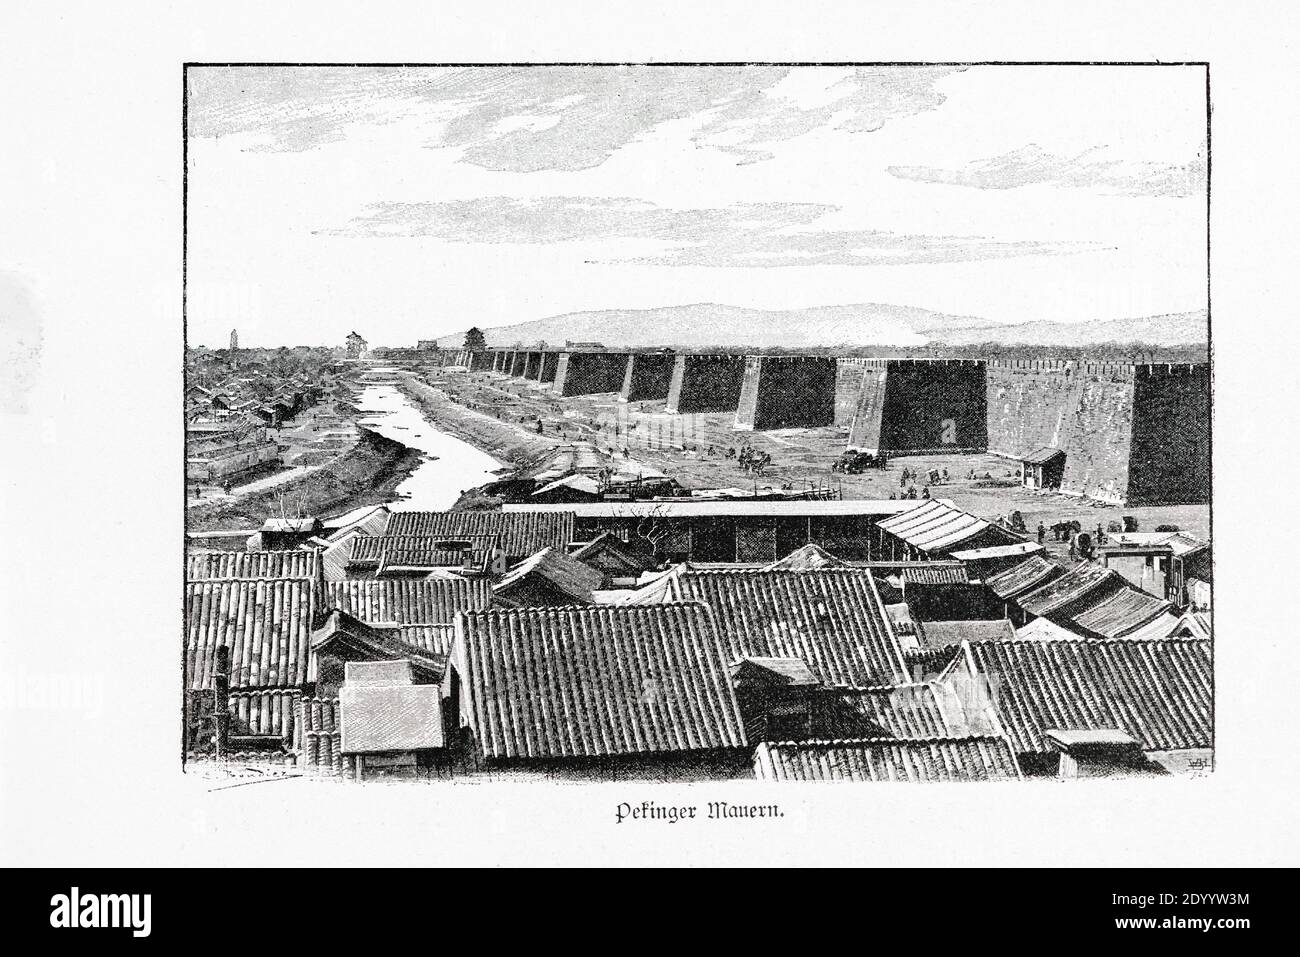 Title 'Pekinger Mauern' or 'Peking Walls' landscape with thick walls, a town and river, Ilustration from 'Die Haupstädte der Welt', Breslau about 1897 Stock Photo